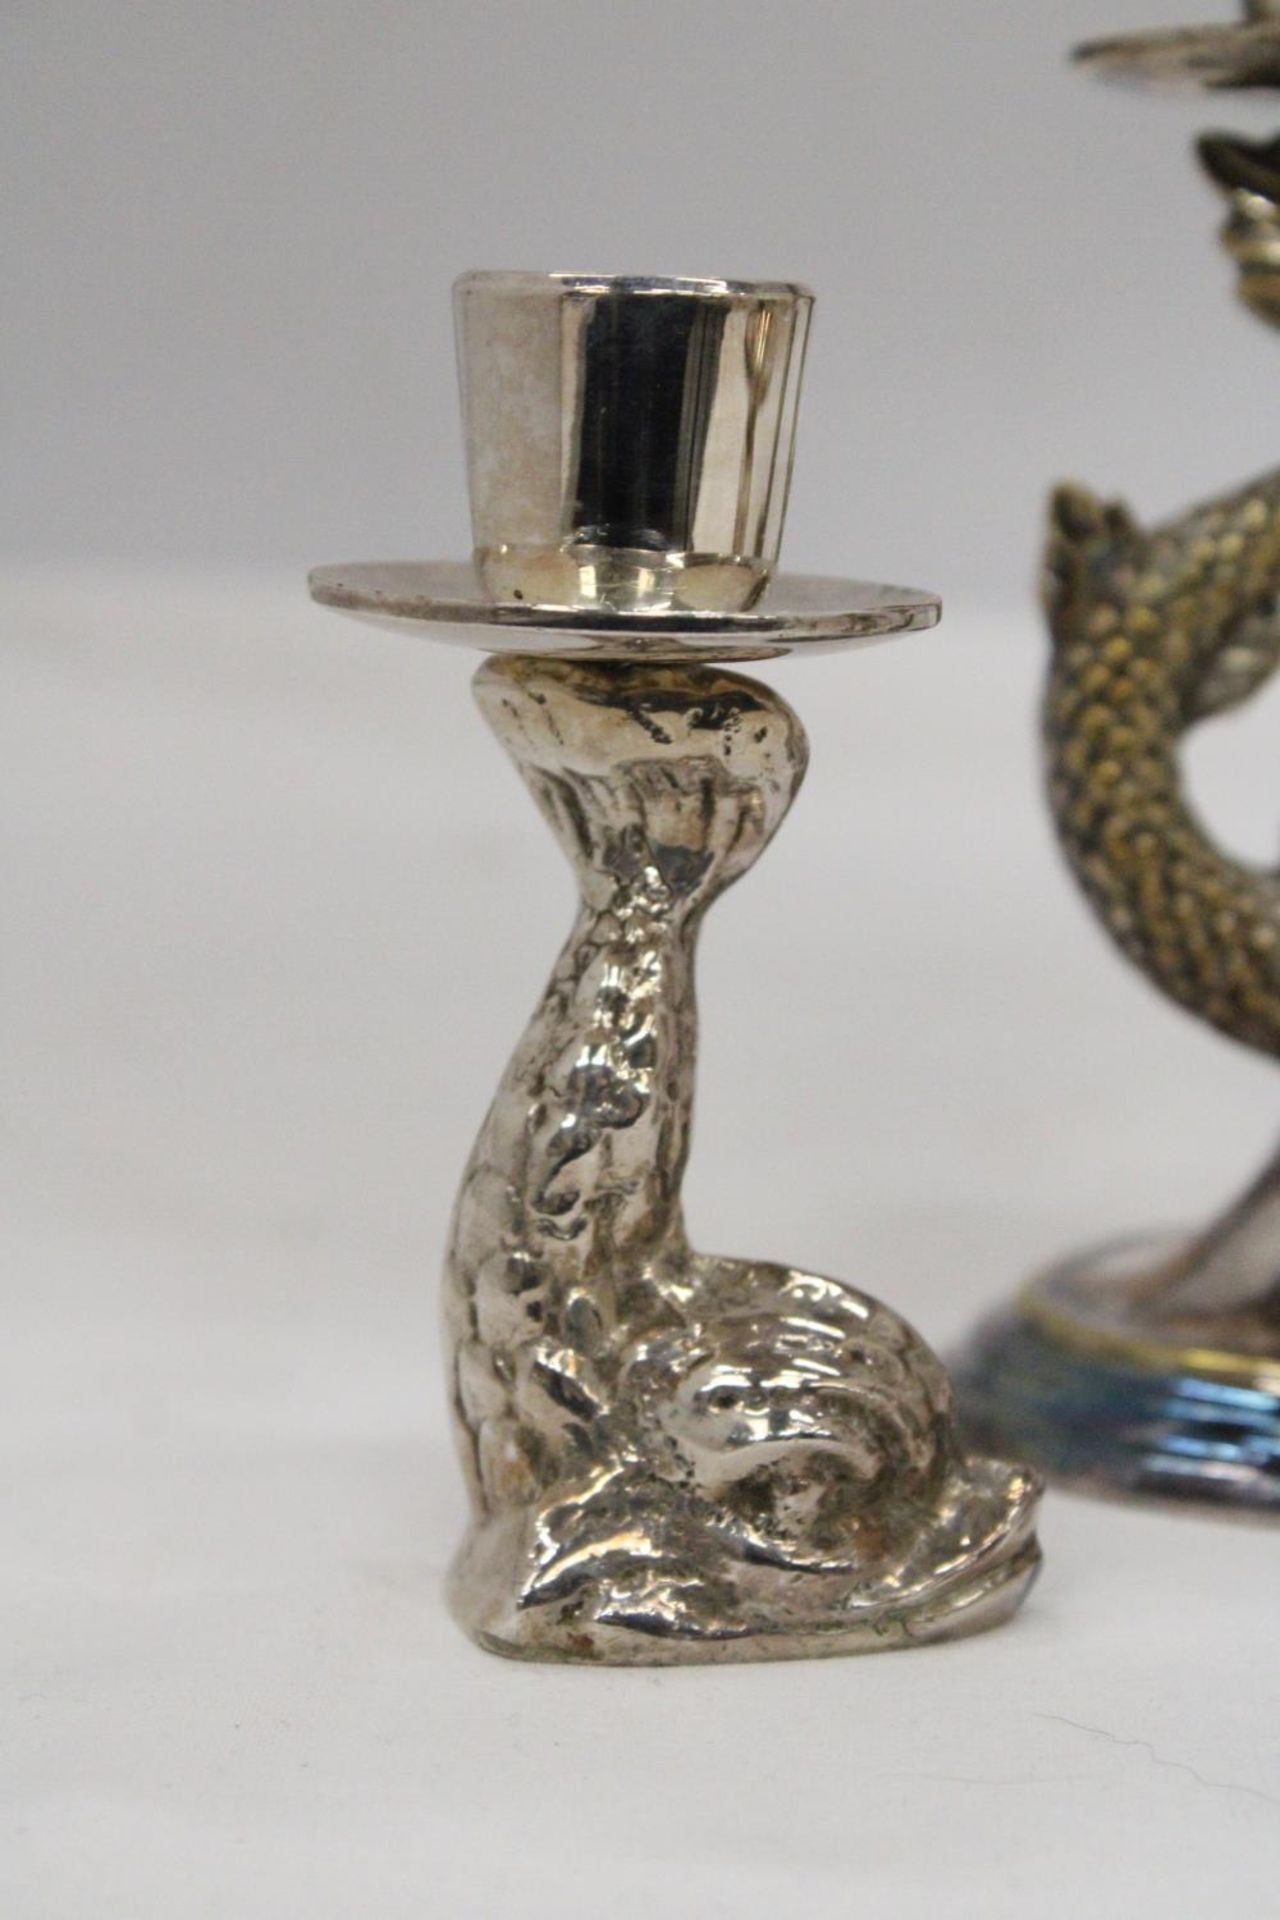 TWO VINTAGE ORNATE SILVER PLATED KOI CARP CANDLE HOLDERS PLUS THREE FURTHER KOI FISH CANDLE STICKS - Image 2 of 7